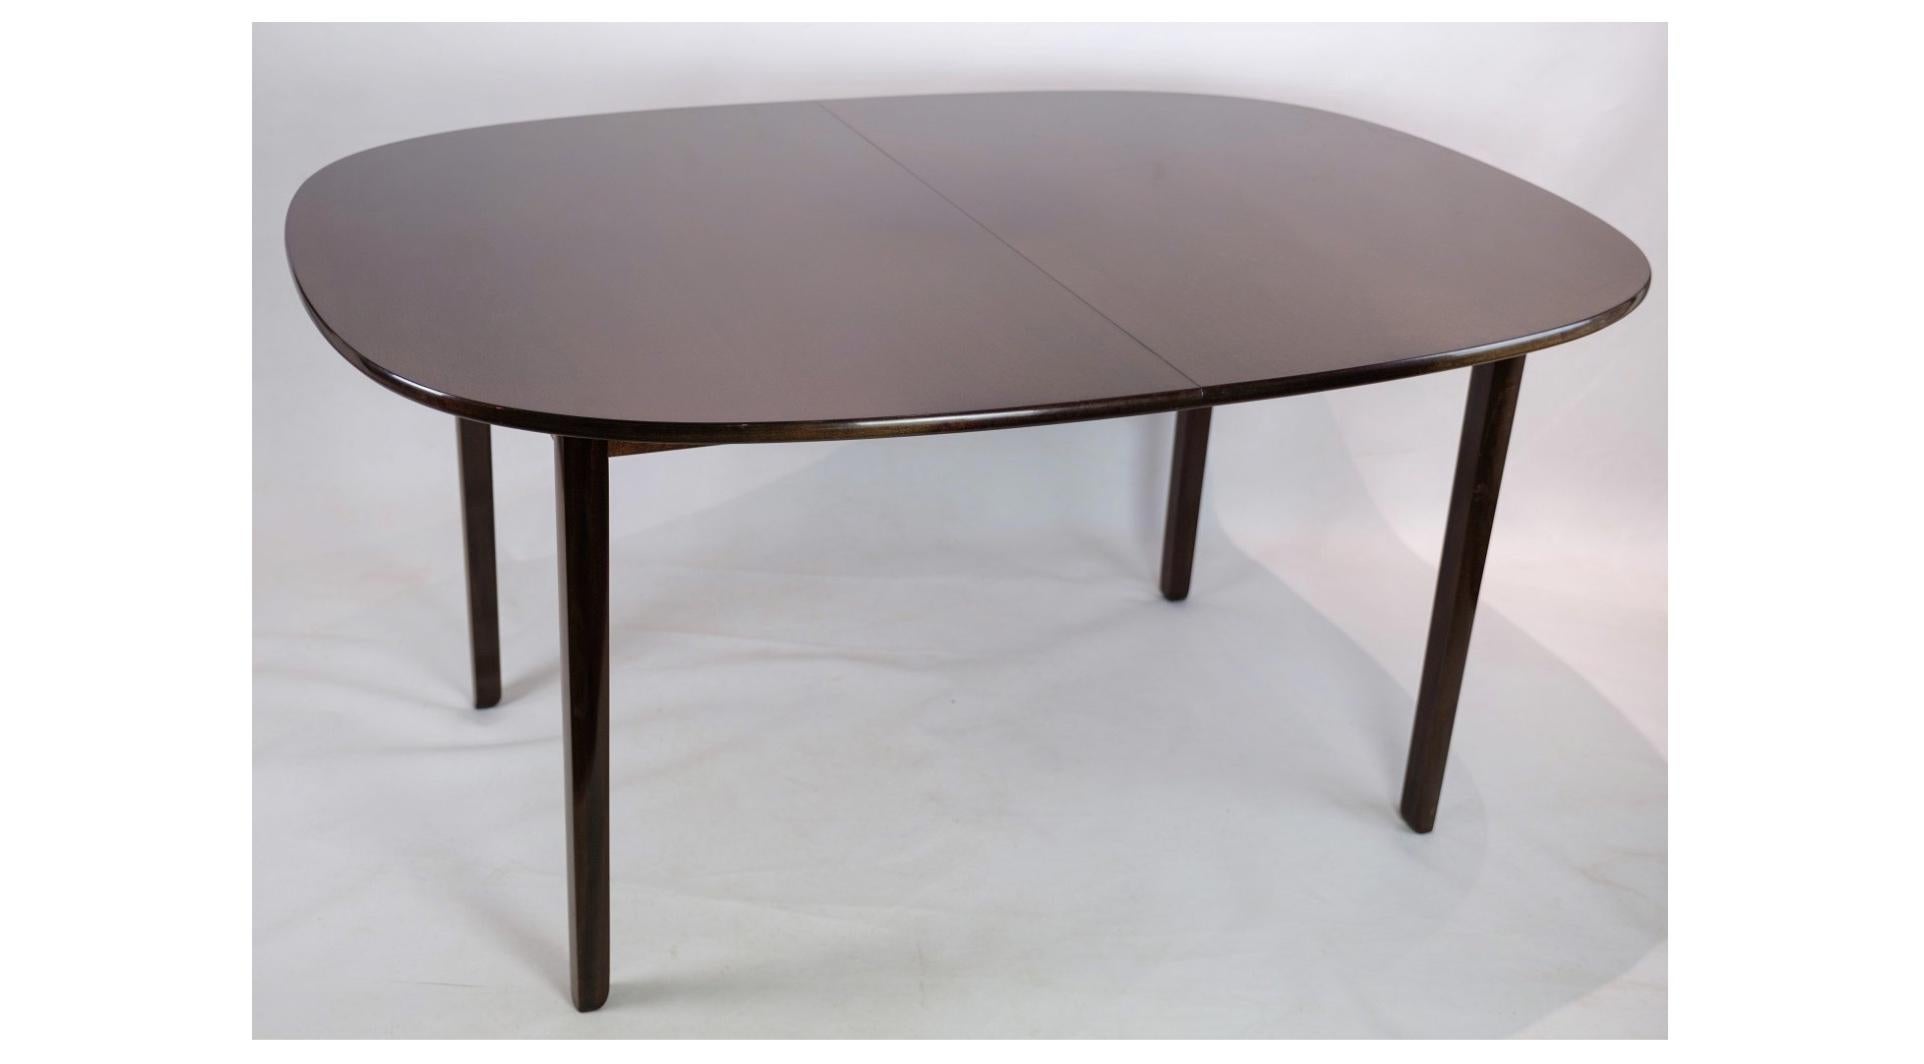 Dining Table Made In Dark Mahogany Designed By Ole Wancher Made by P. Jeppesen In Good Condition For Sale In Lejre, DK